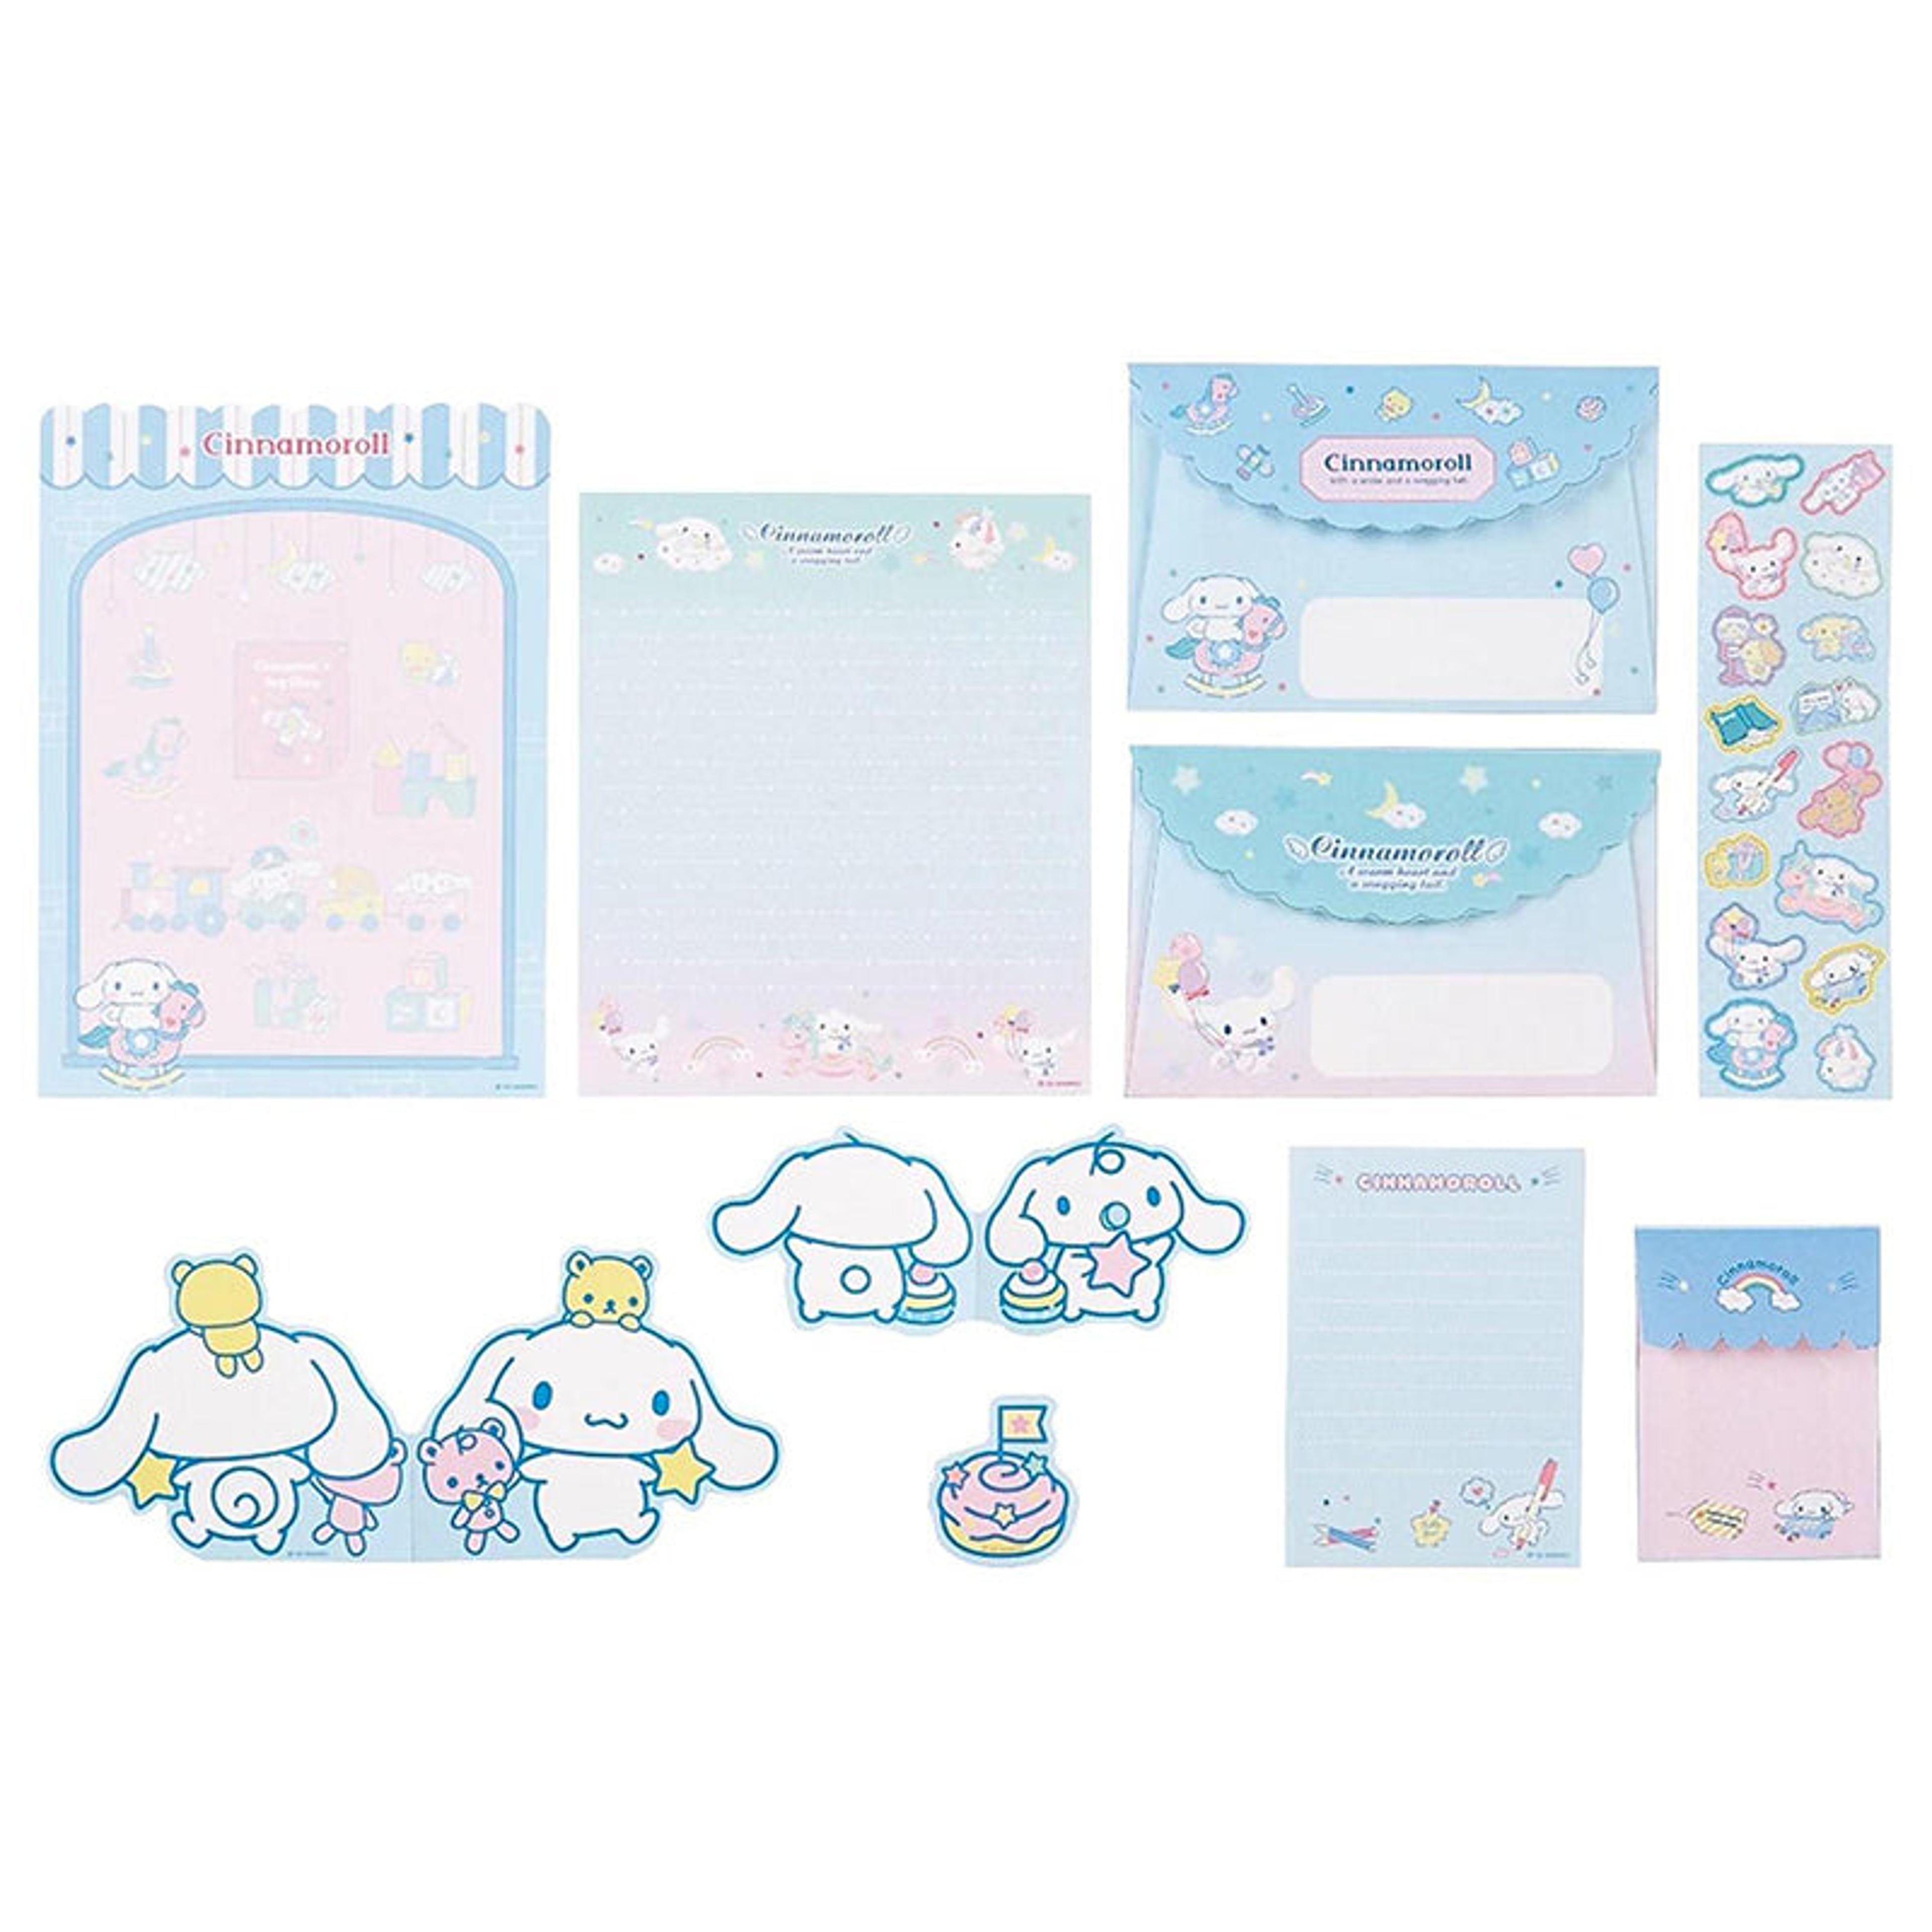 Alternate View 6 of Sanrio Character Variety Letter Set